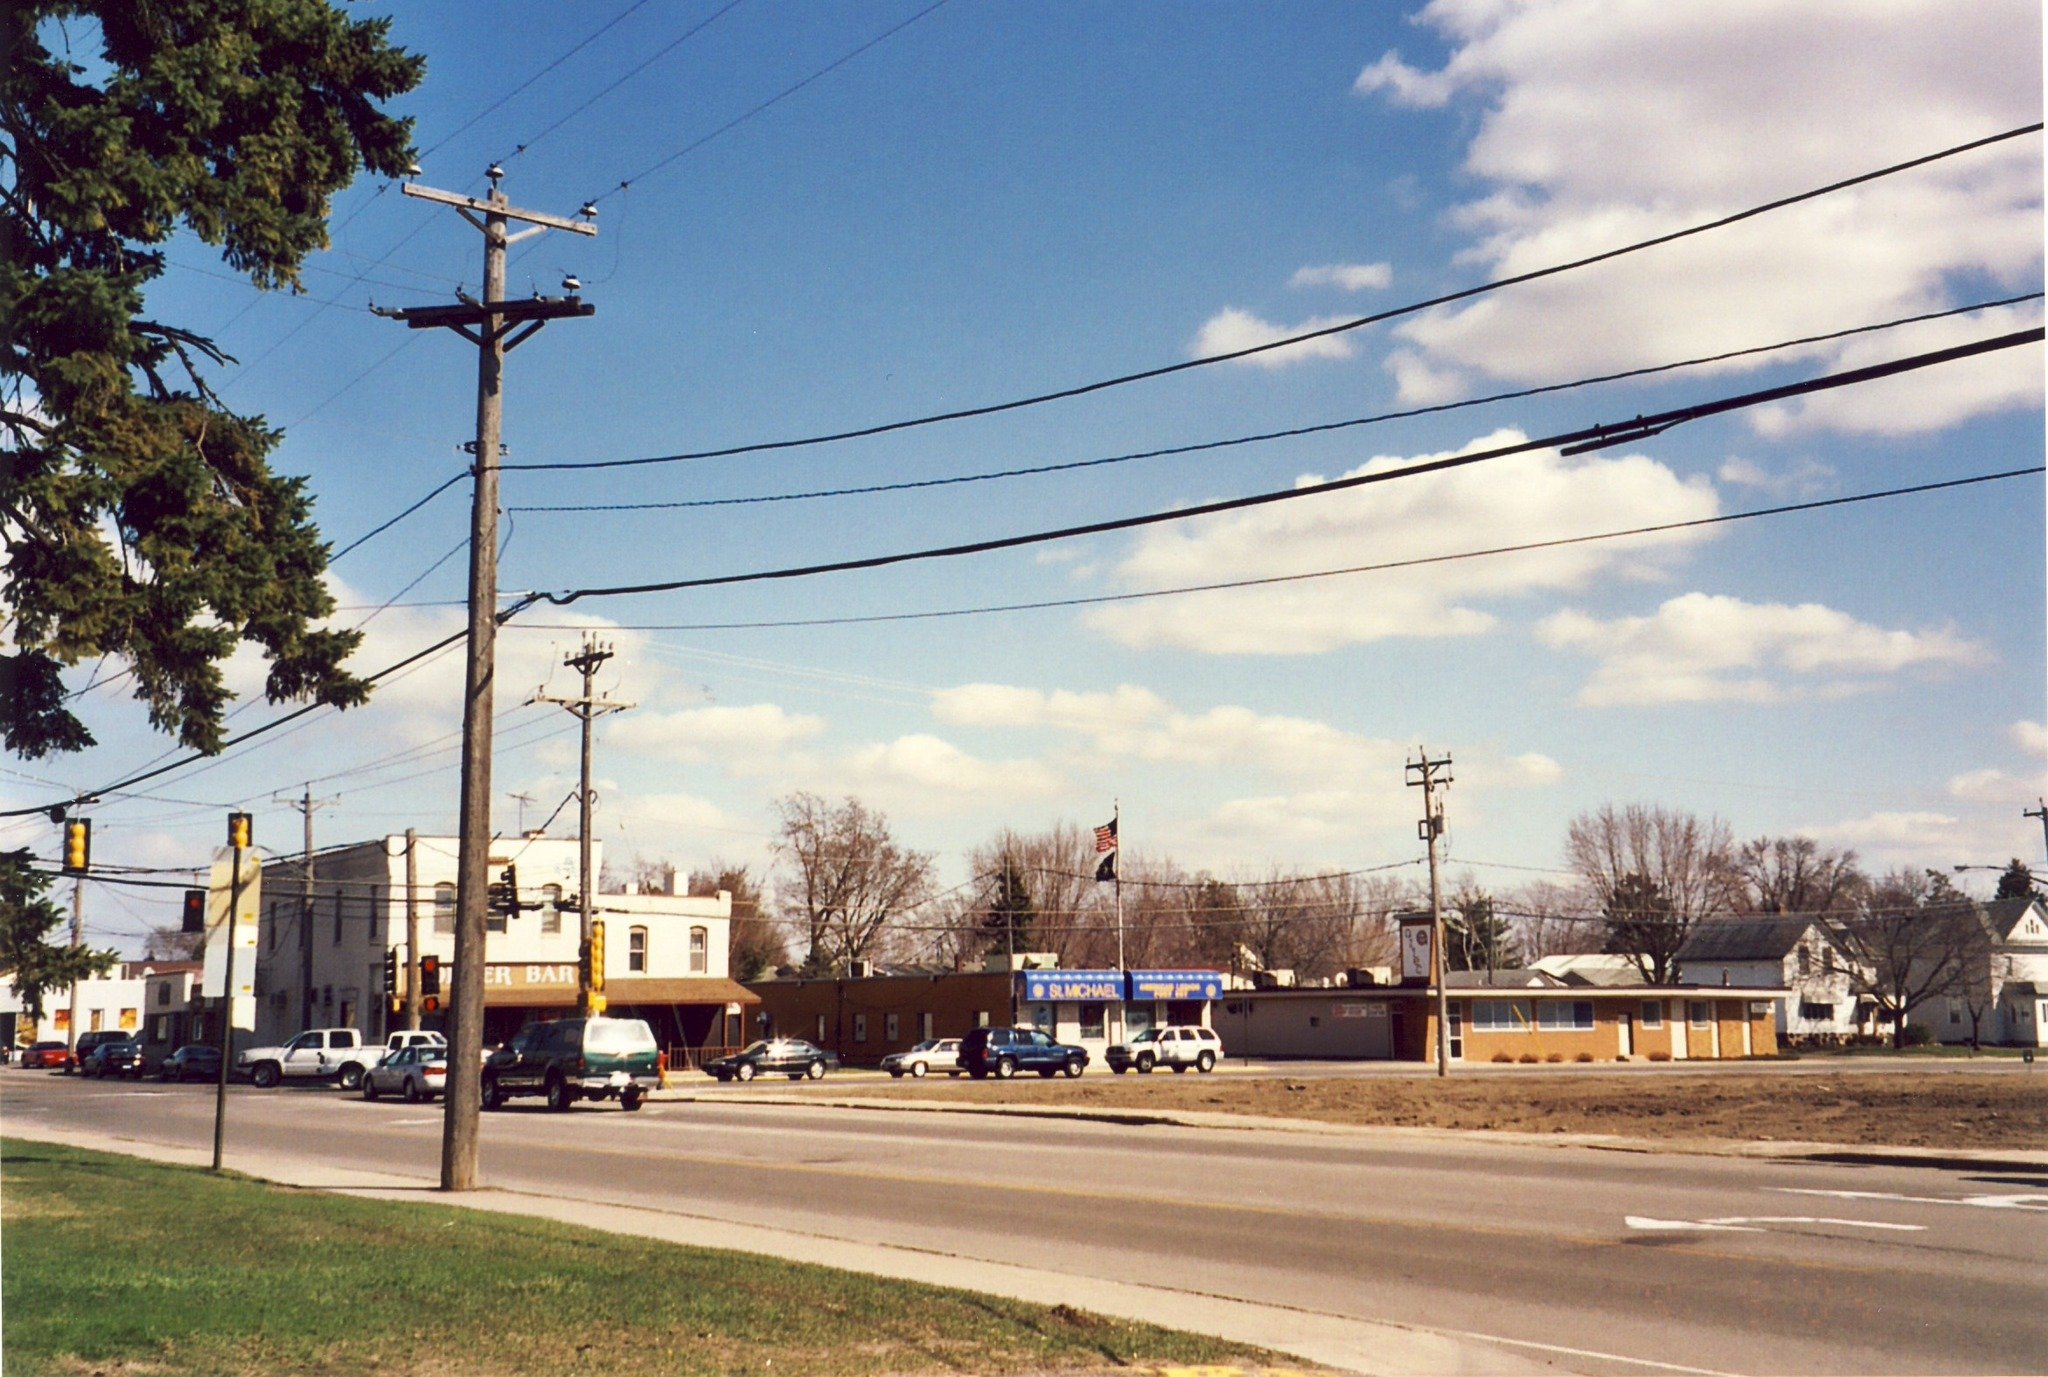 This was downtown St. Michael just 20 years ago. The photo was taken in April of 2004 shortly after most of the southwest quadrant was razed for street widening and redevelopment. While nostalgia causes us to lament the changes that have taken place,